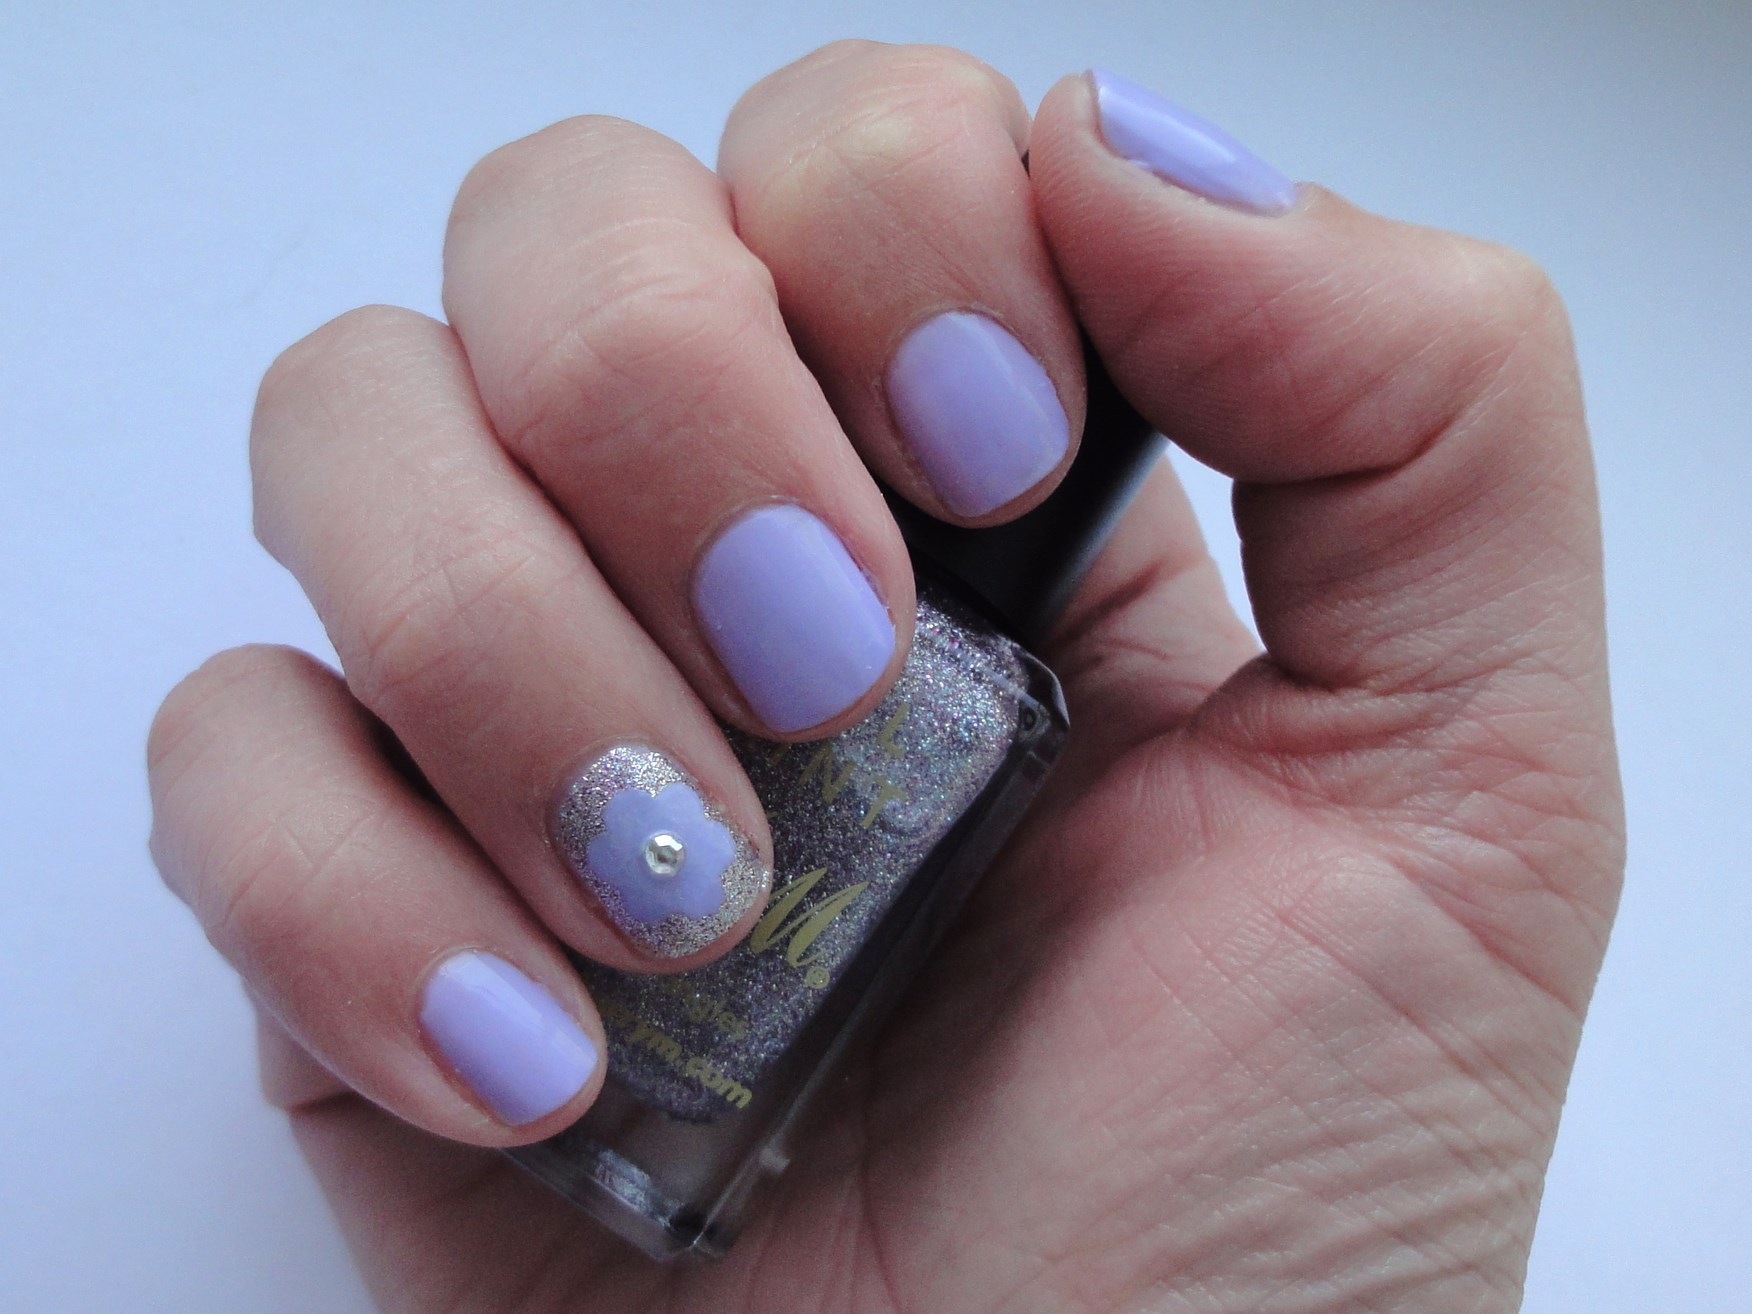 9. Lilac Gel Nail Art with Flowers - wide 2